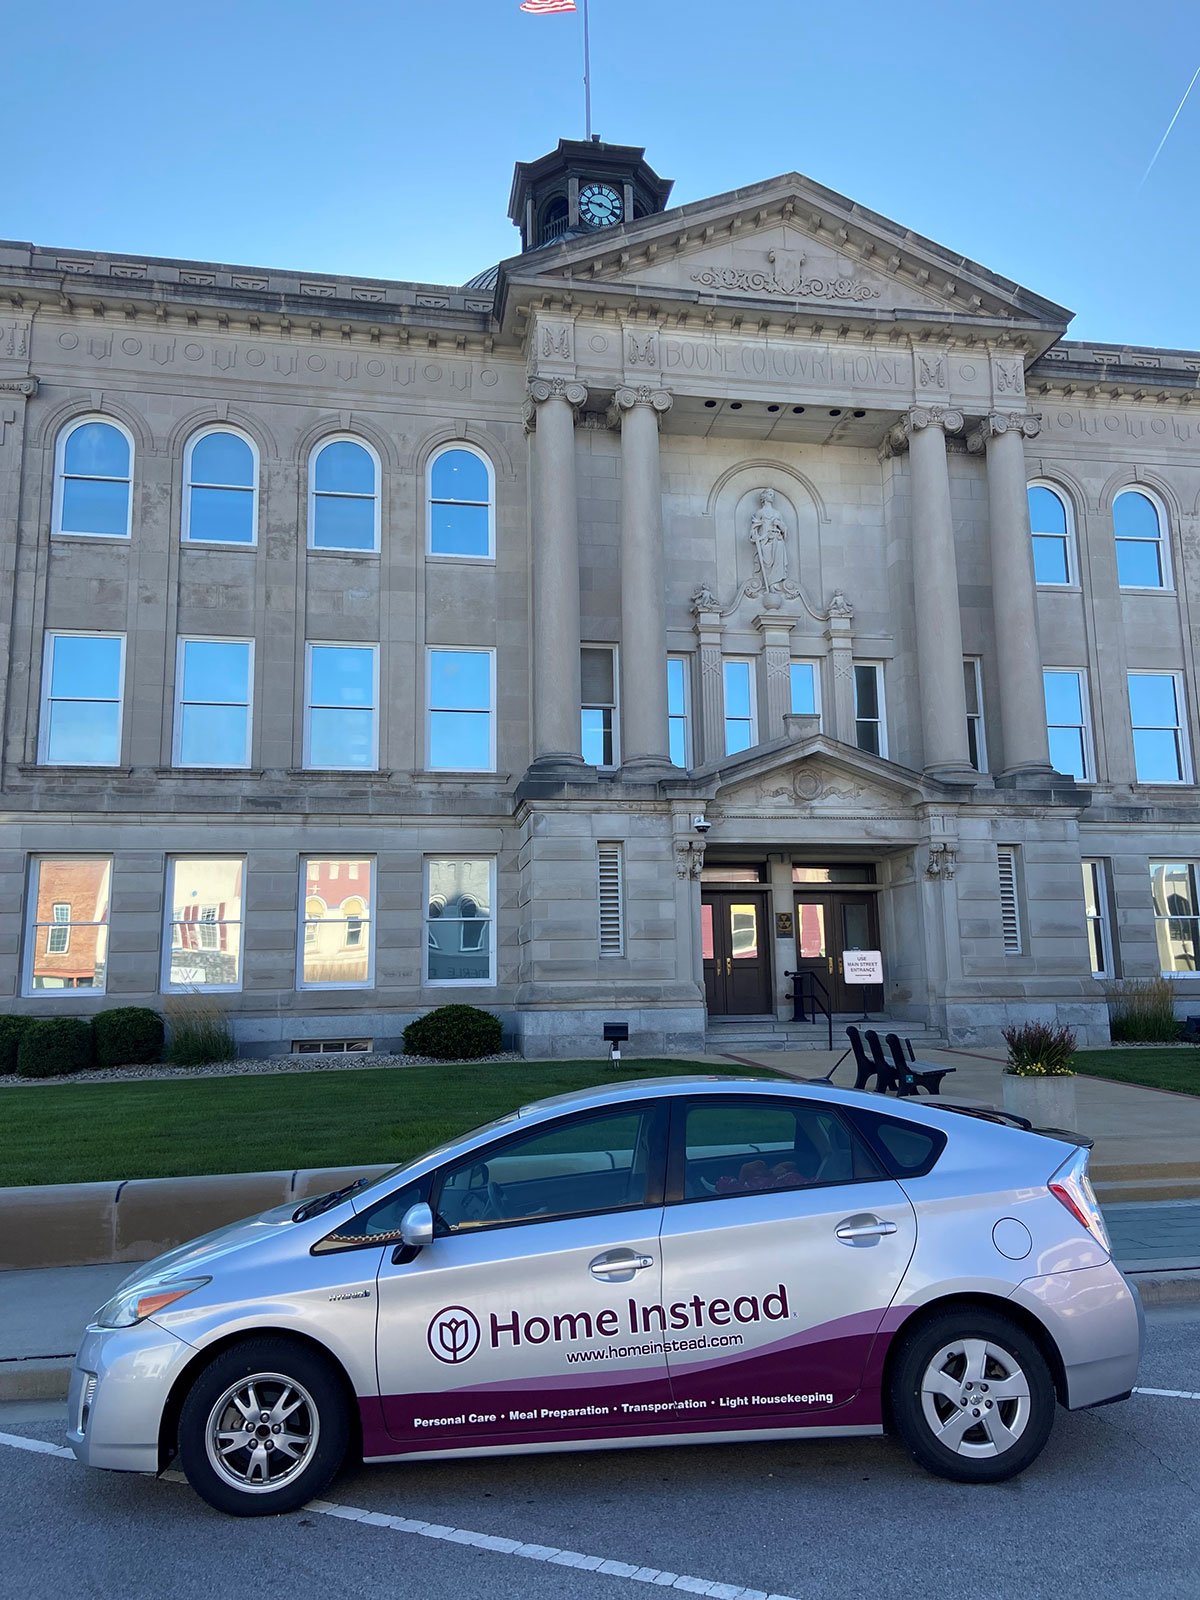 home instead vehicle outside of the boone county courthouse in lebanon indiana